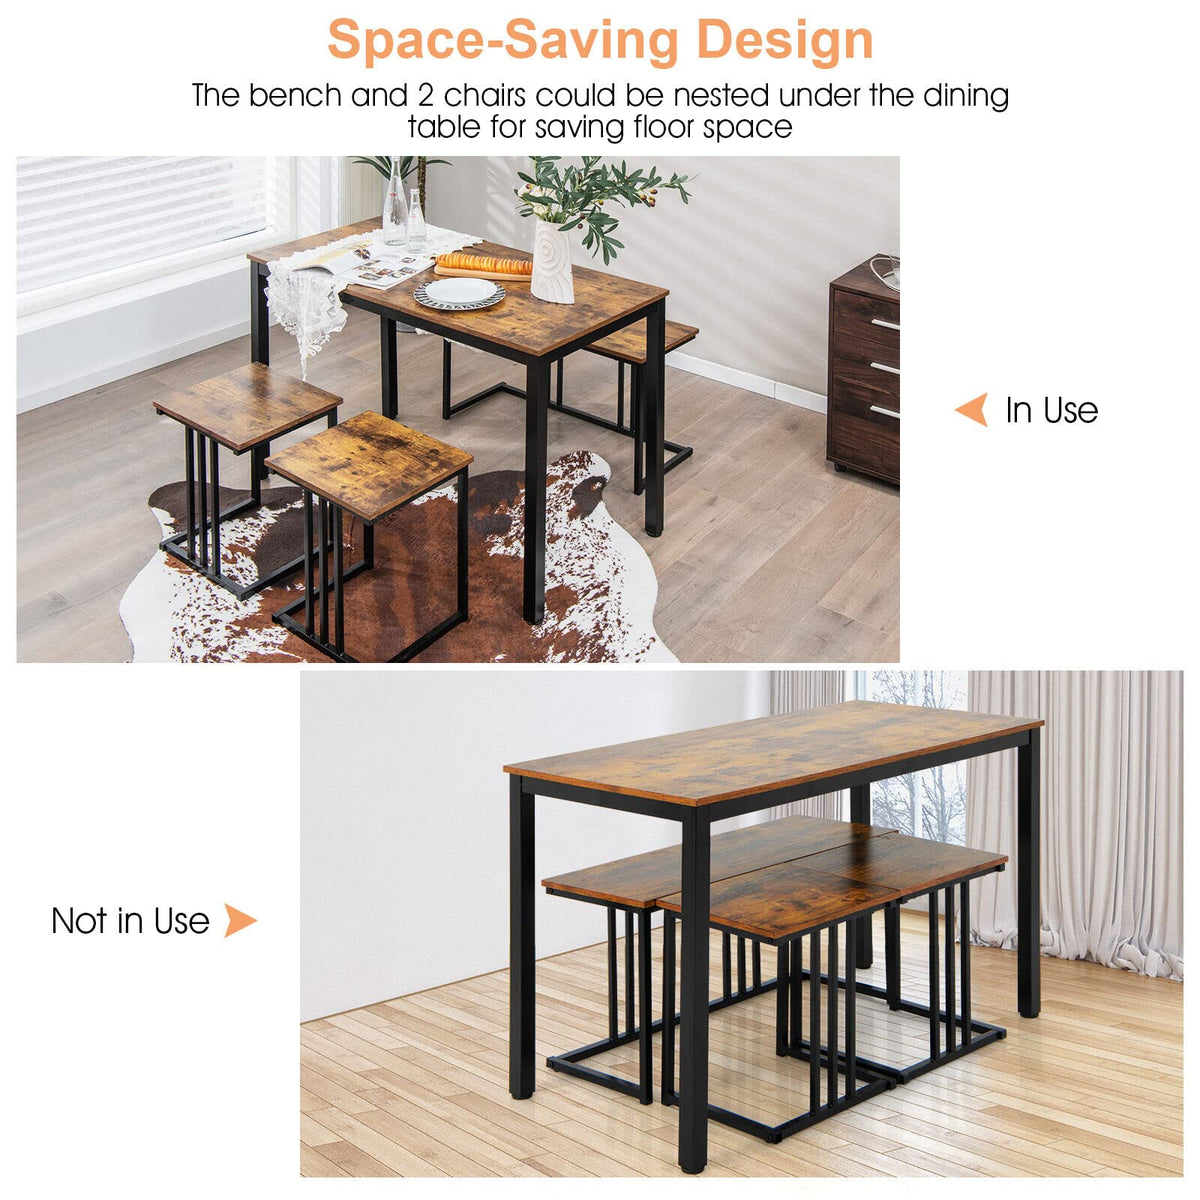 Giantex 4 Pieces Dining Table Set, Rectangular Wooden Dining Table w/B ...